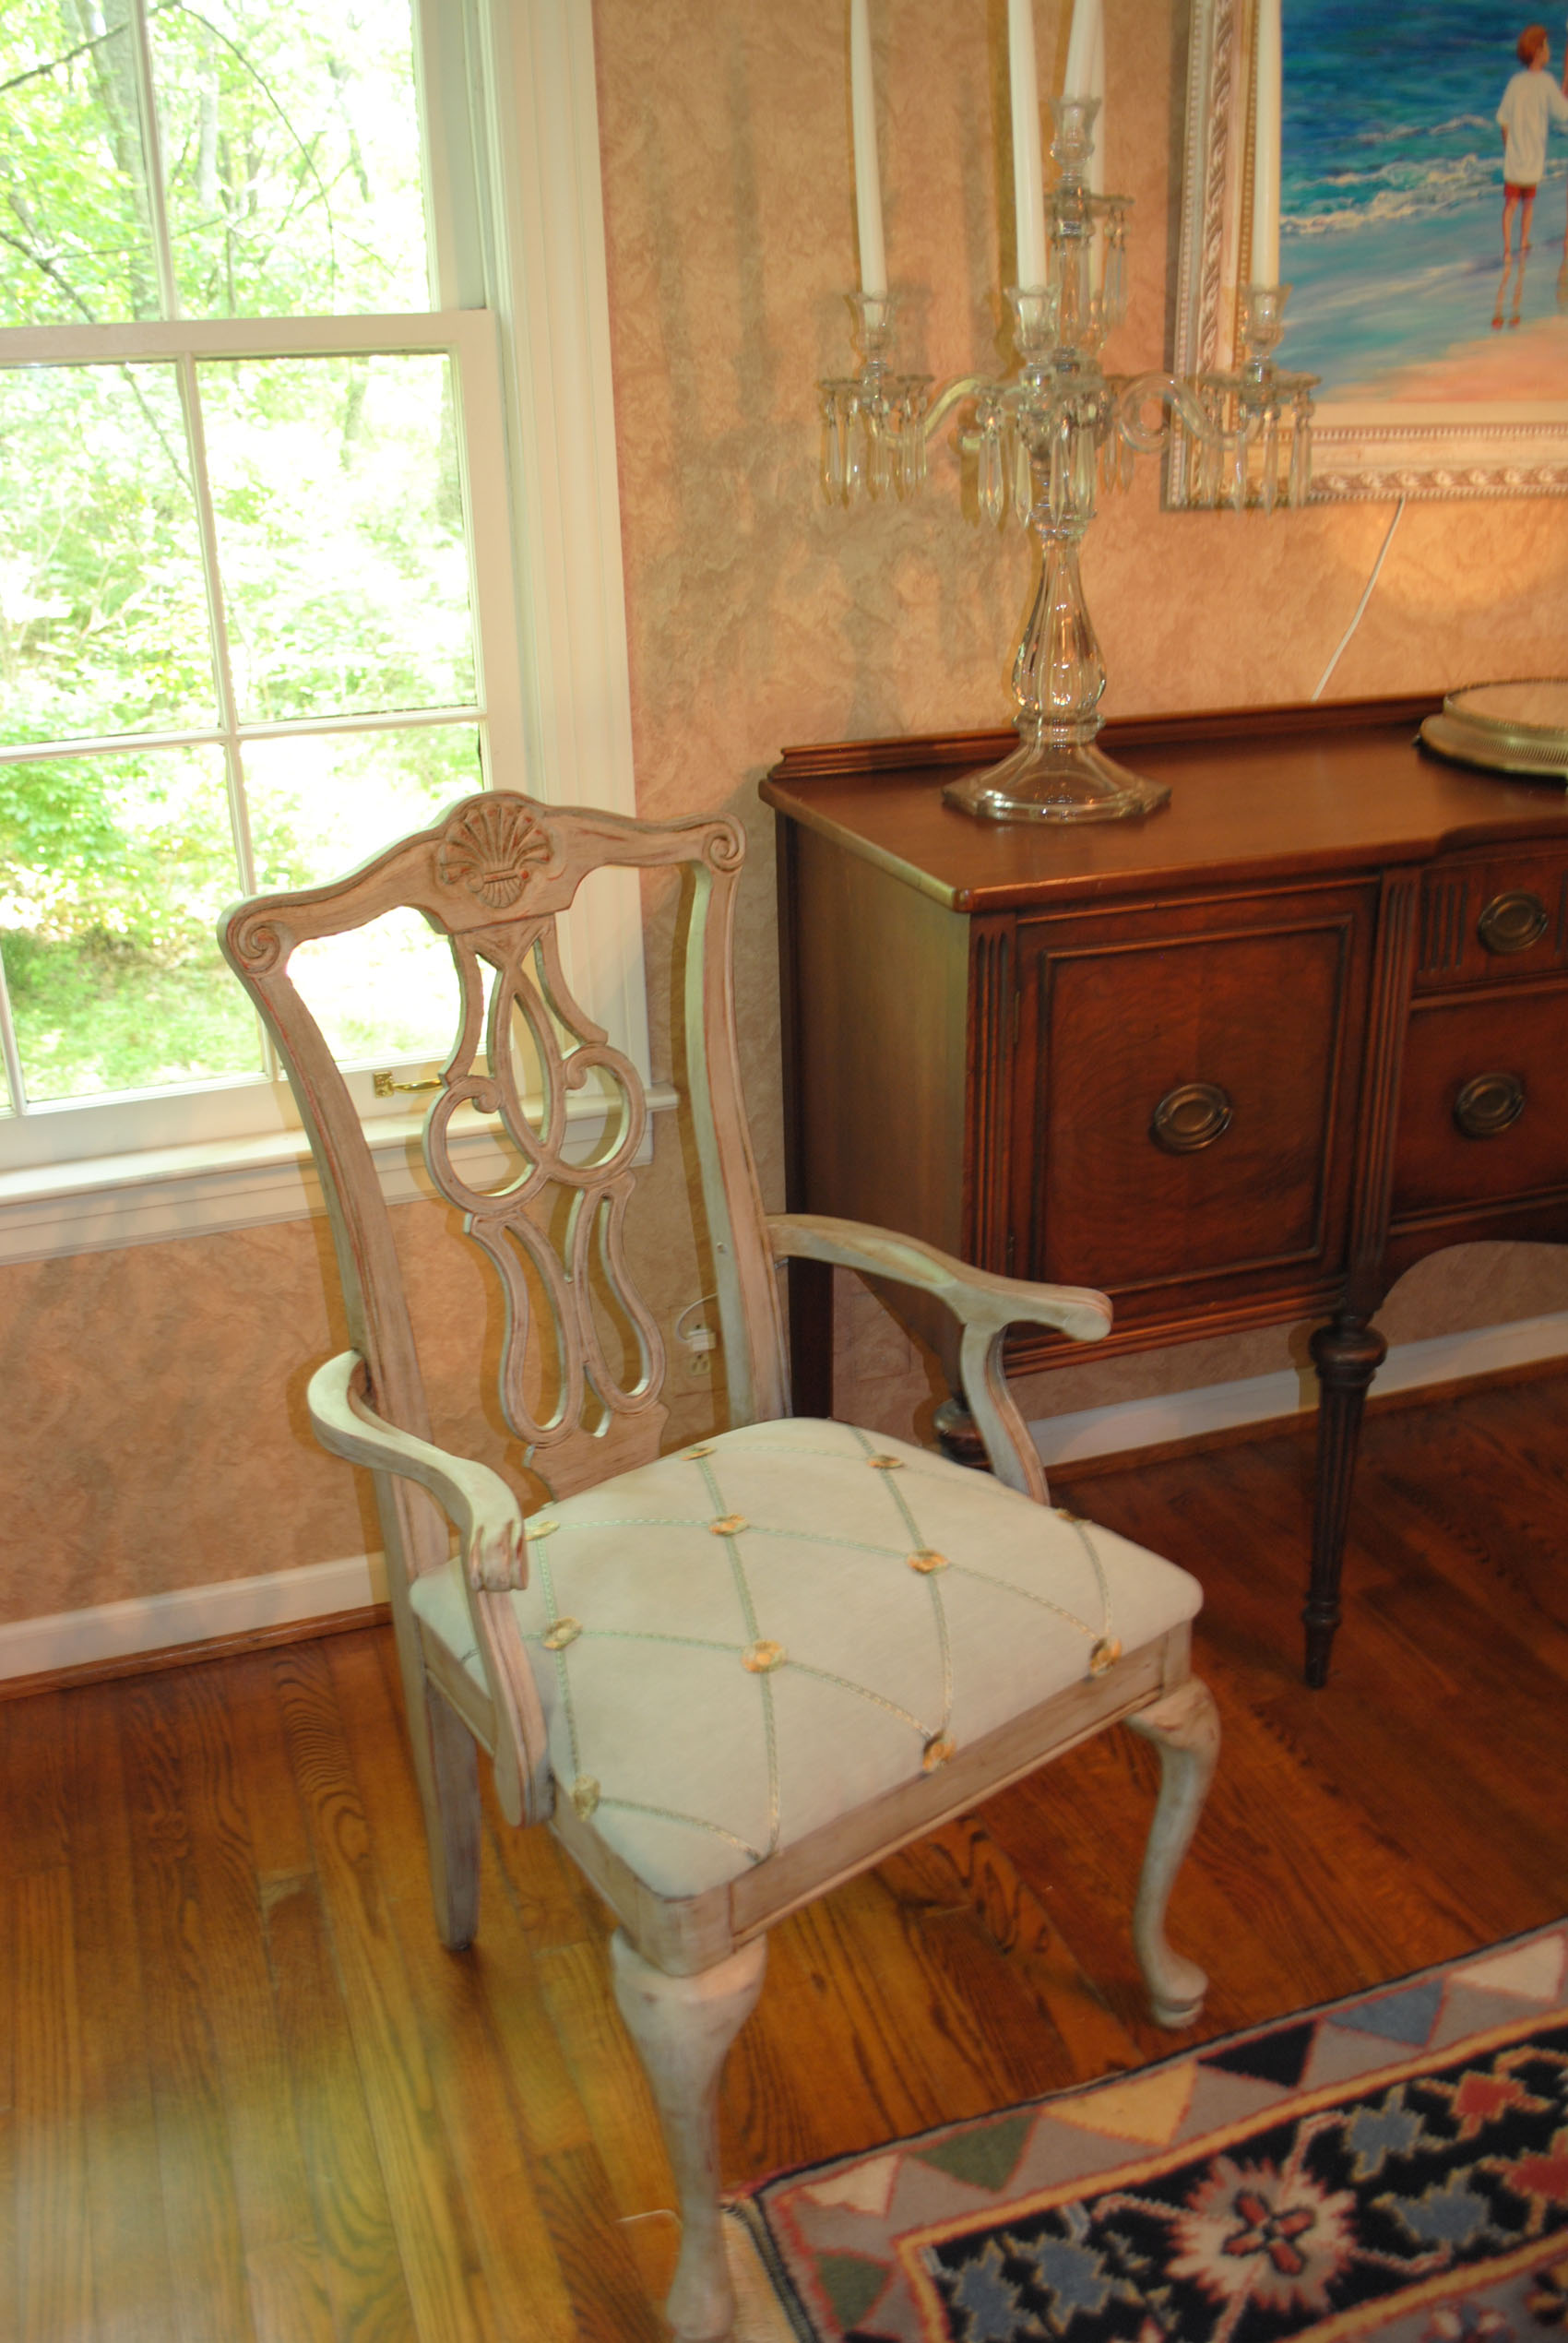 Repurposing Craigslist Cast-offs To French Country Treasures